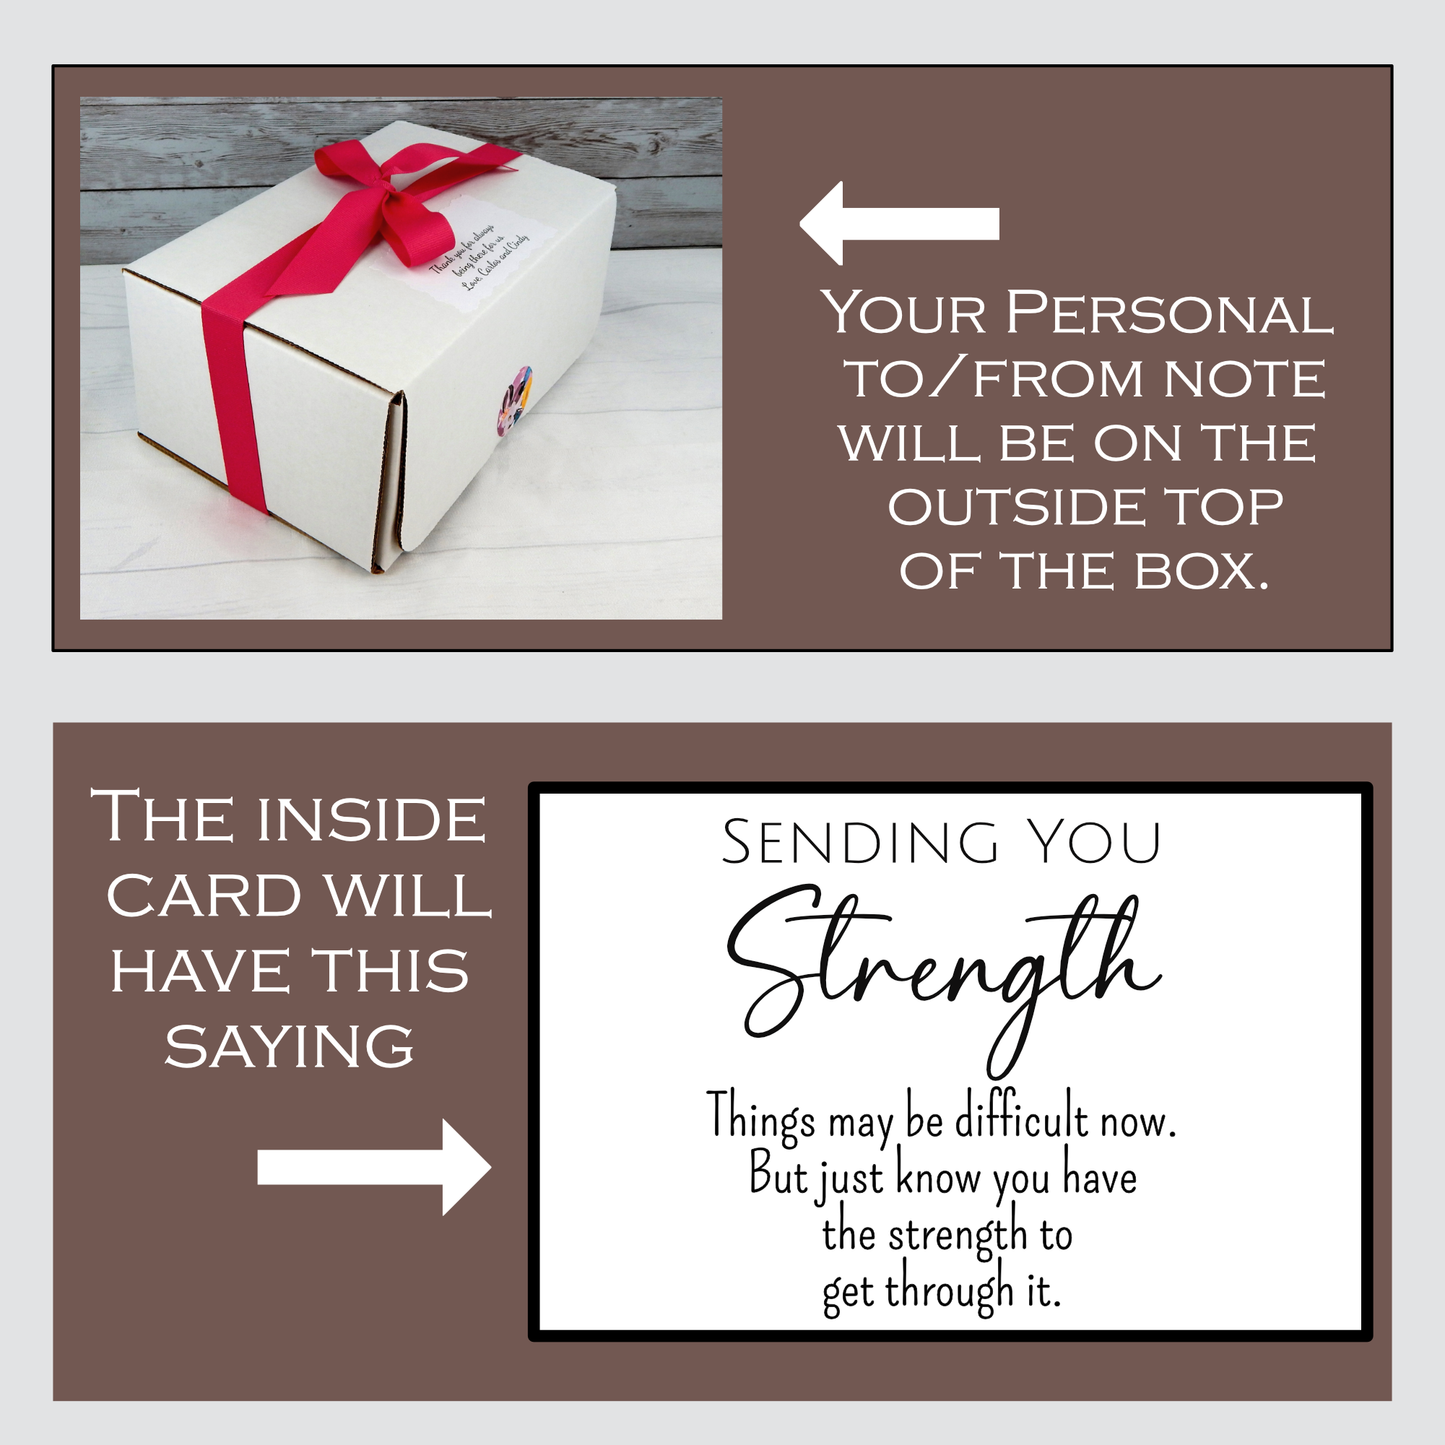 Personalized Gift for Encouragement - Strength Gift Basket